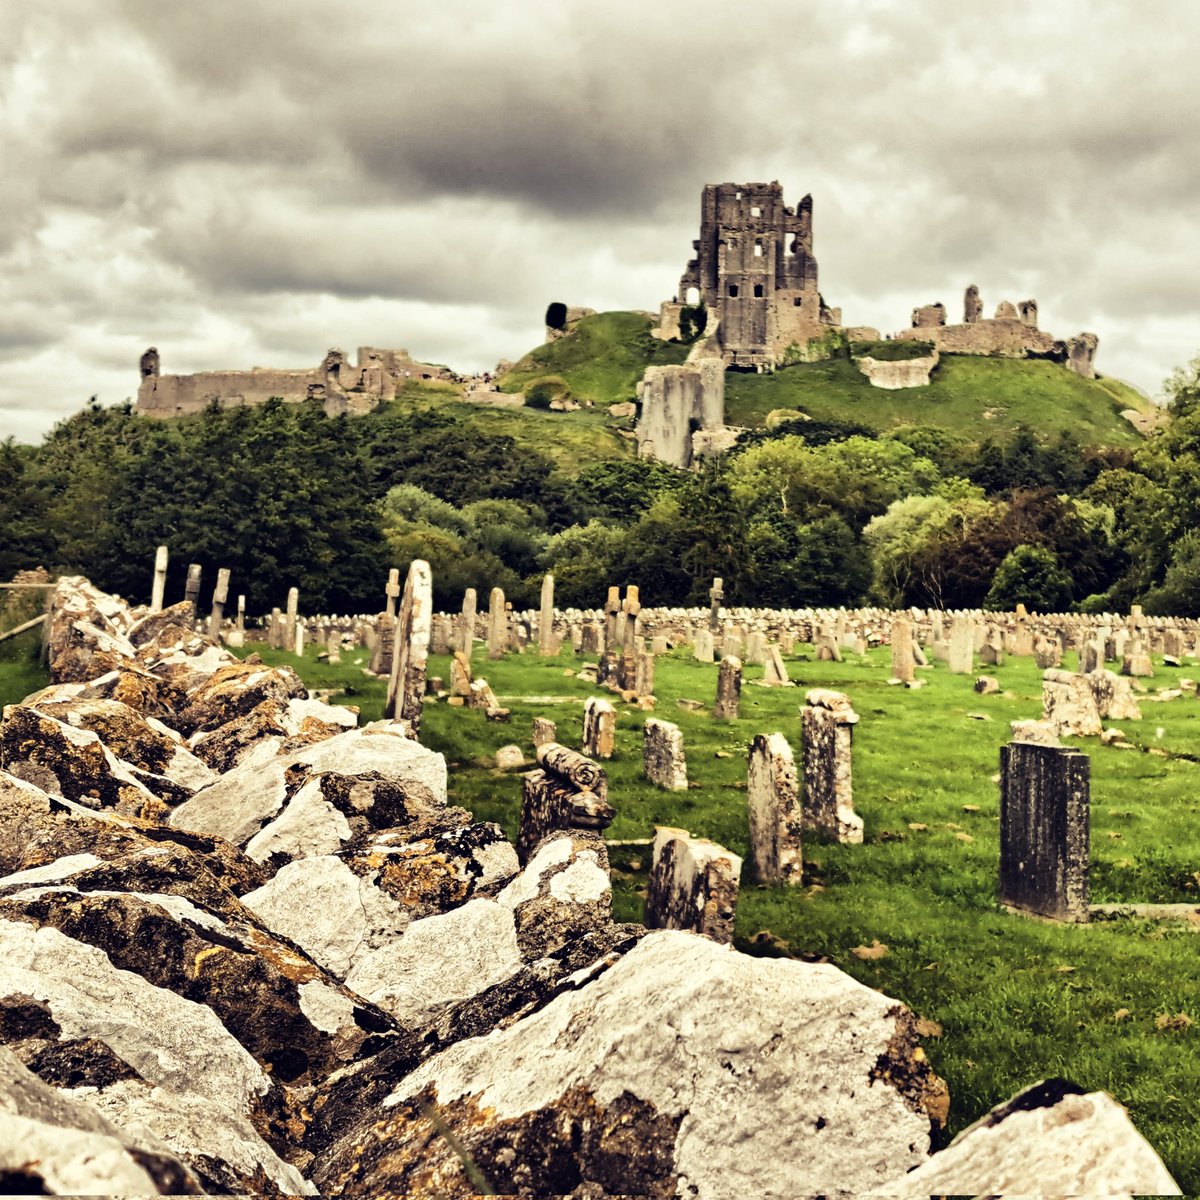 Tombs with a view at #CorfeCastle #Dorset for #tombtuesday